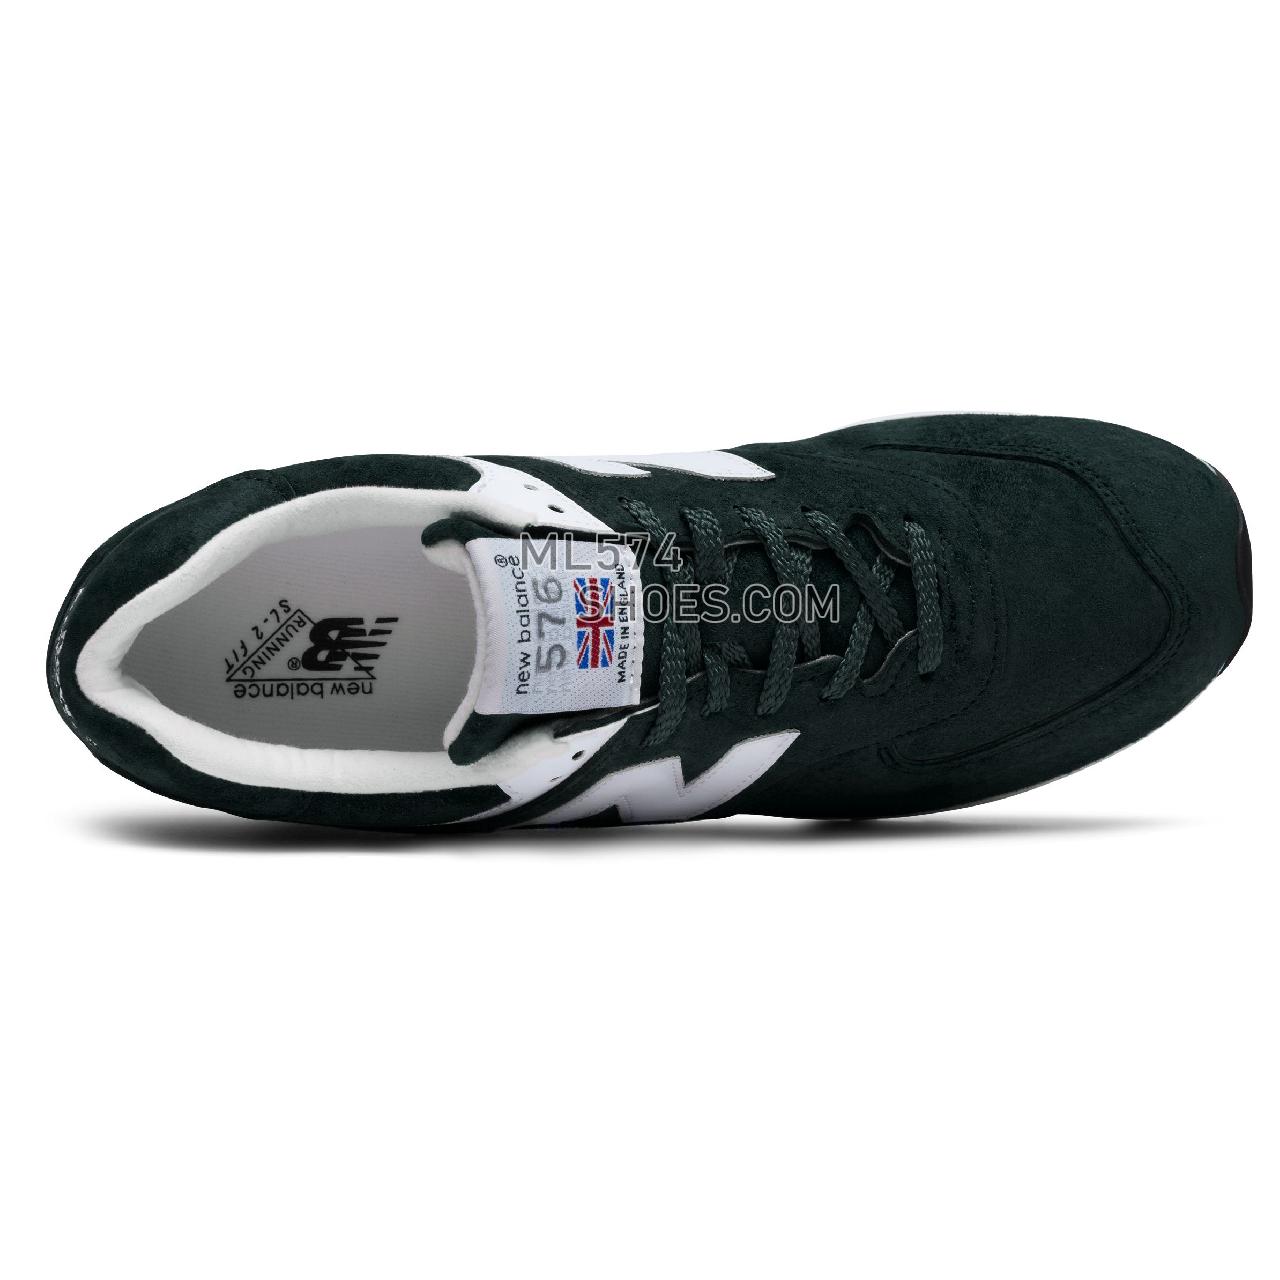 New Balance Made in UK 576 - Men's 576 Made in UK Classic M576-PS3 - Forest Green with White - M576DG